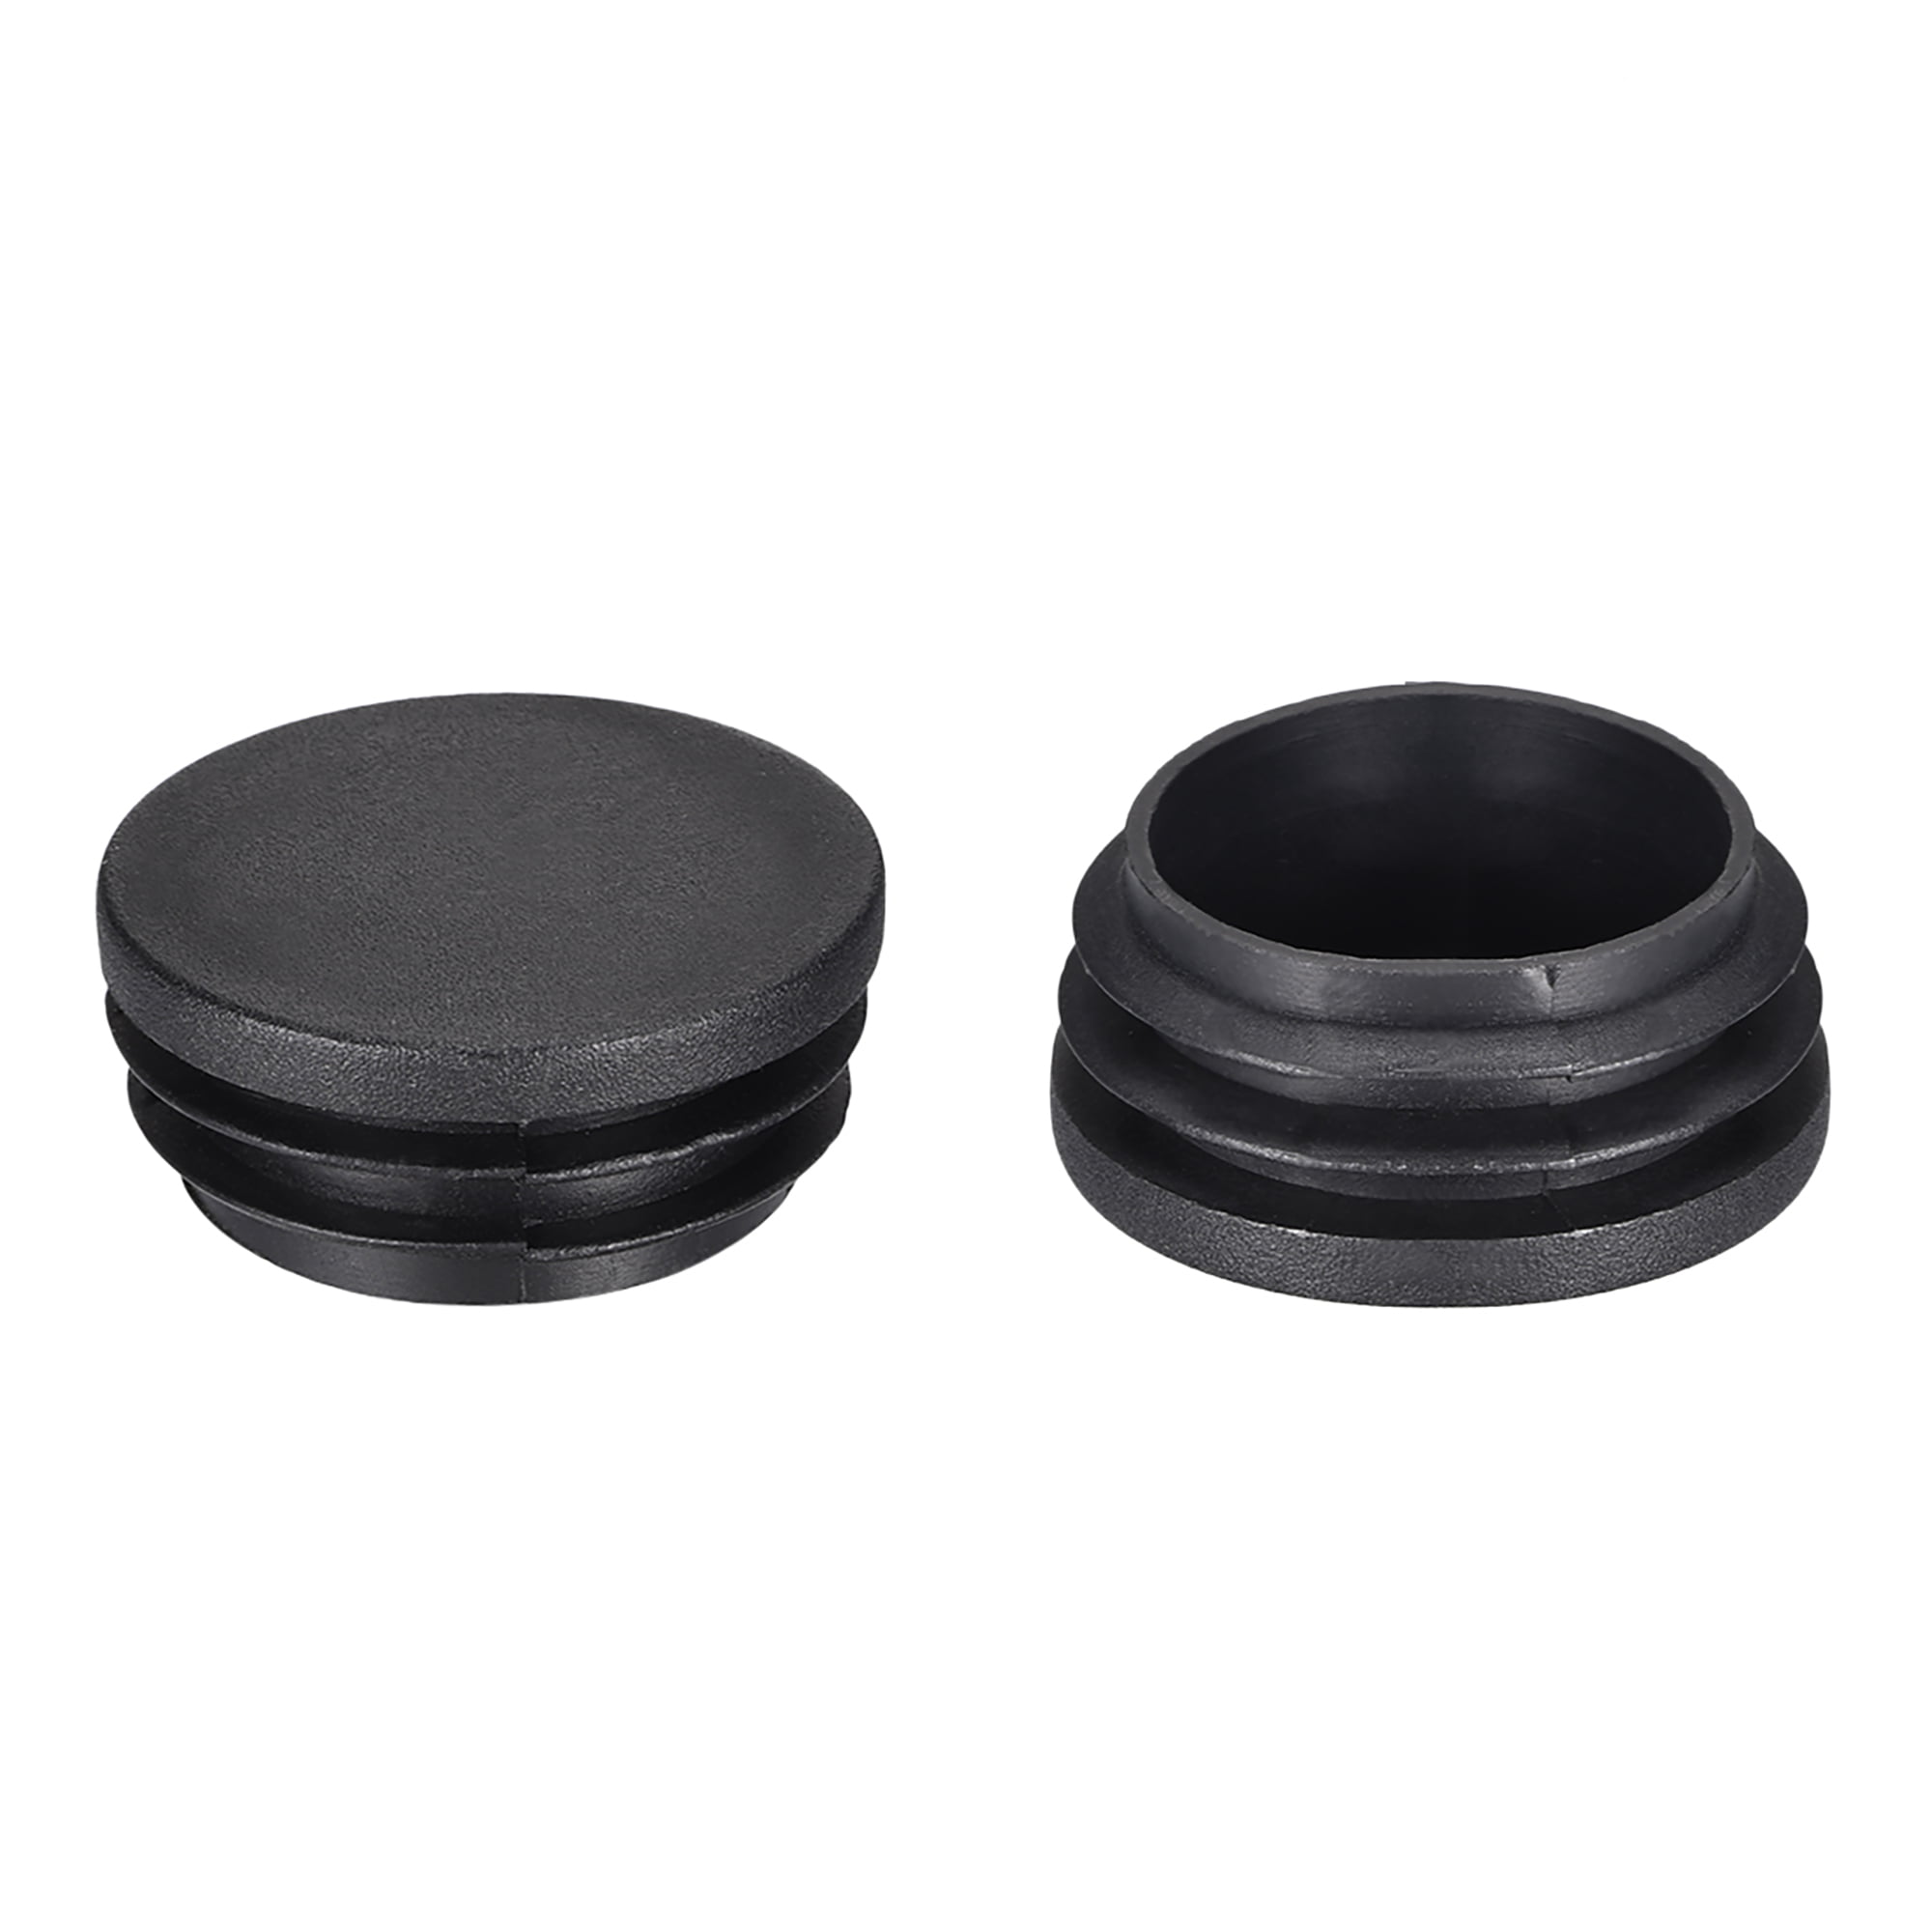 End Caps for Fitness Equipment - 2 Round 14-23 Ga Black Plastic Tubing Plug Fencing Post Steel Furniture Pipe Tube Cover Insert 4 Pack 2 Inch End Cap